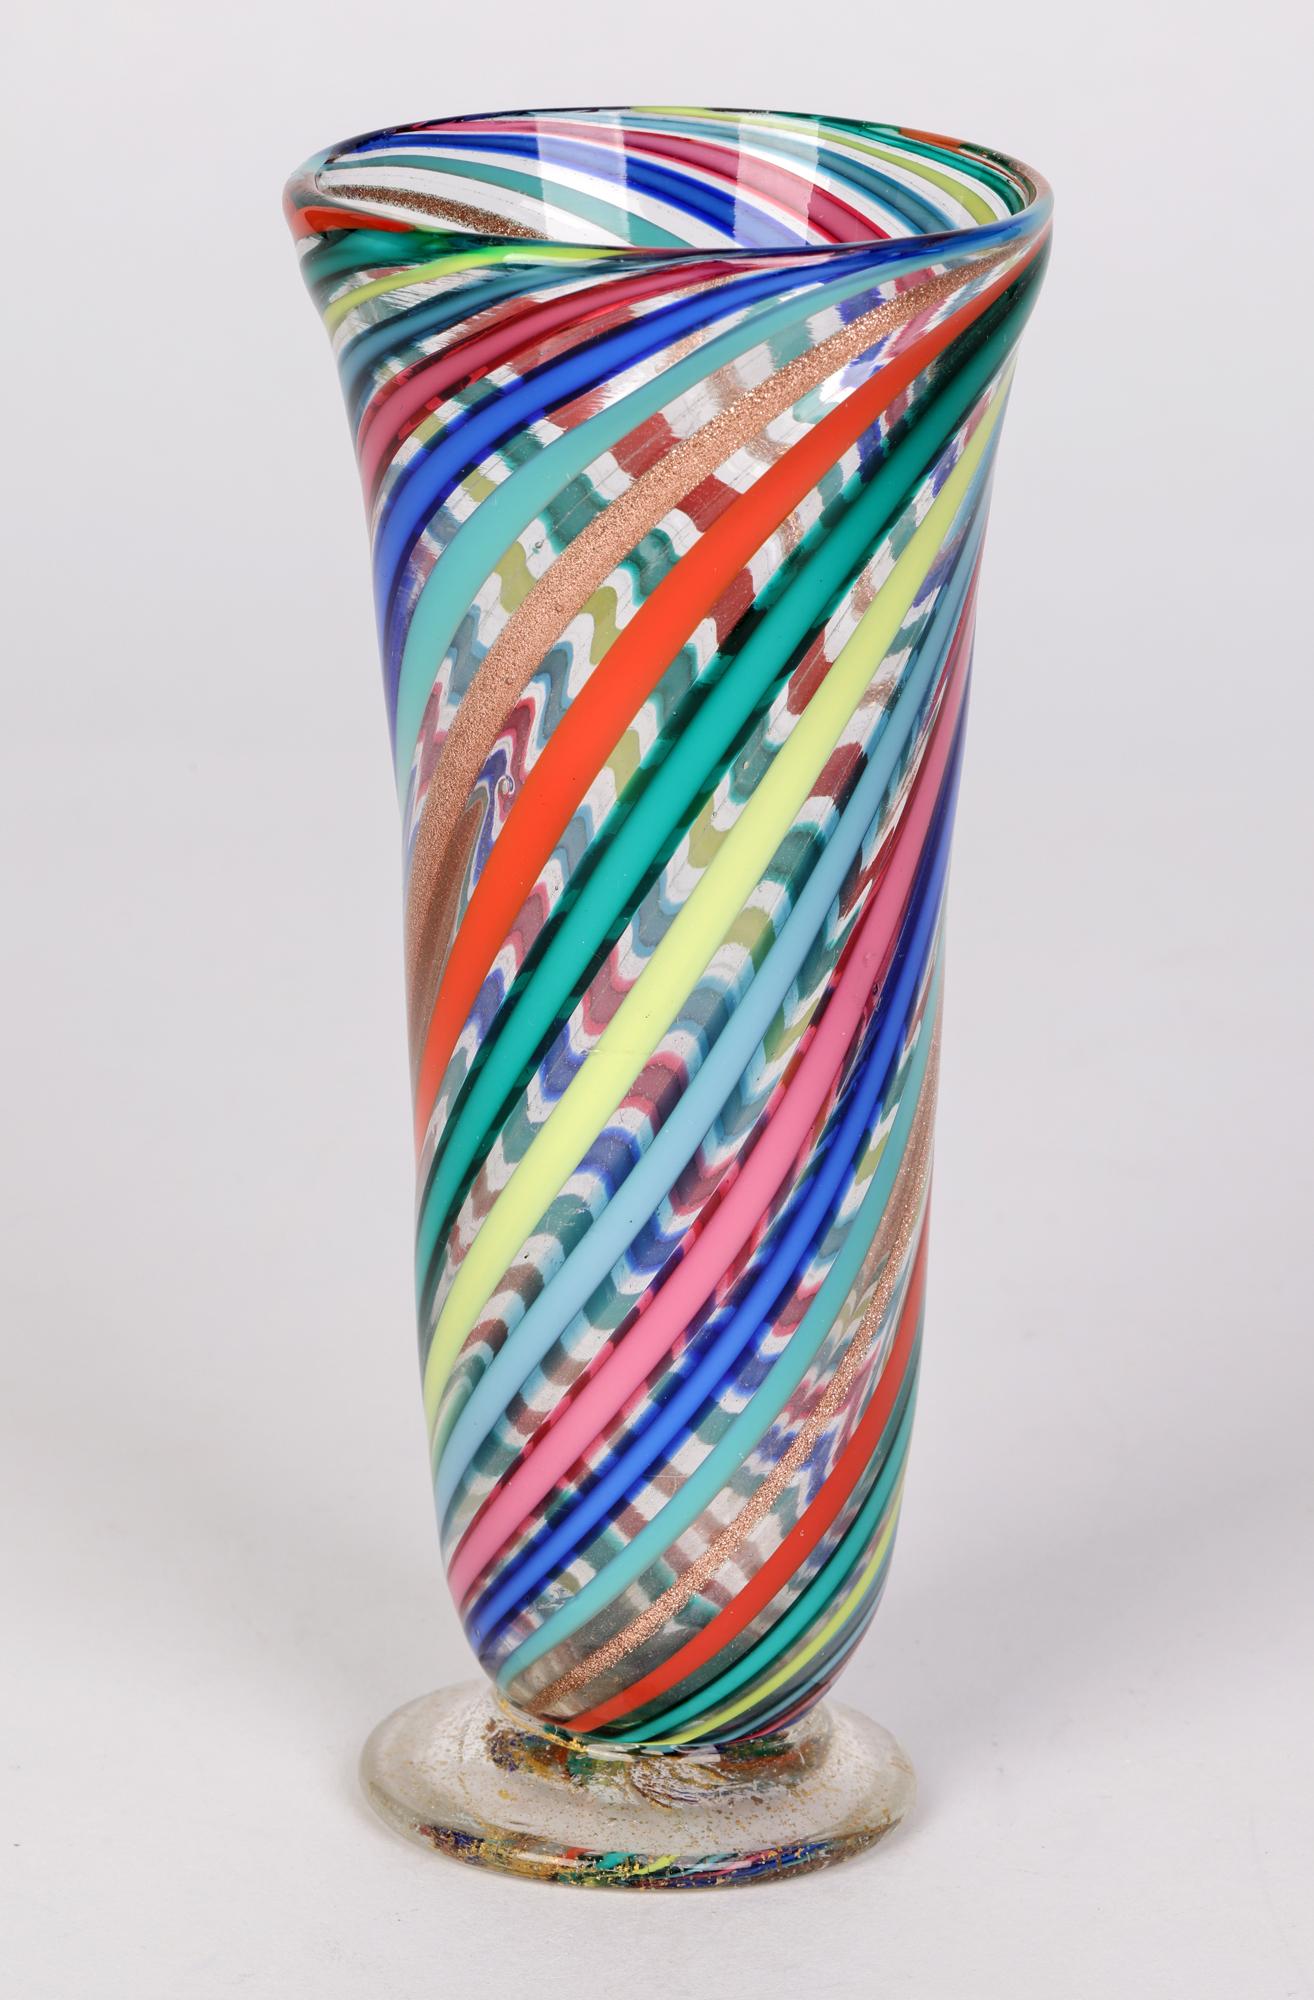 Blown Glass Gio Ponti Attributed Murano a Canne Art Glass Vase